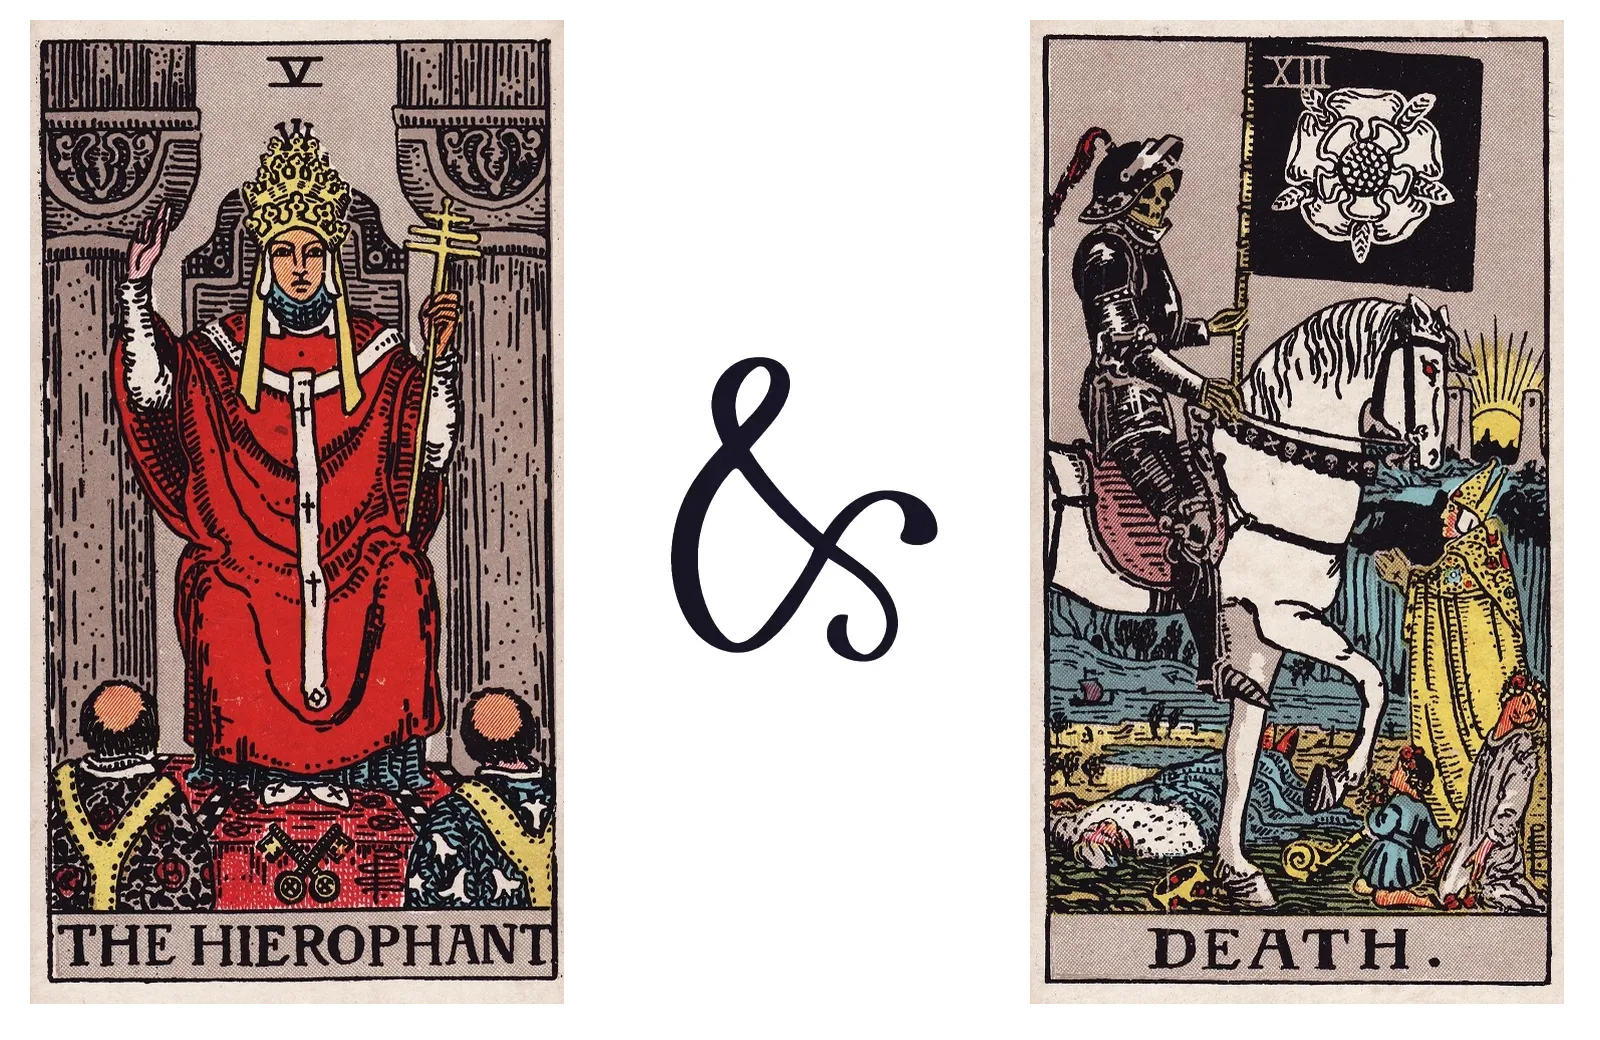 The Hierophant and Death